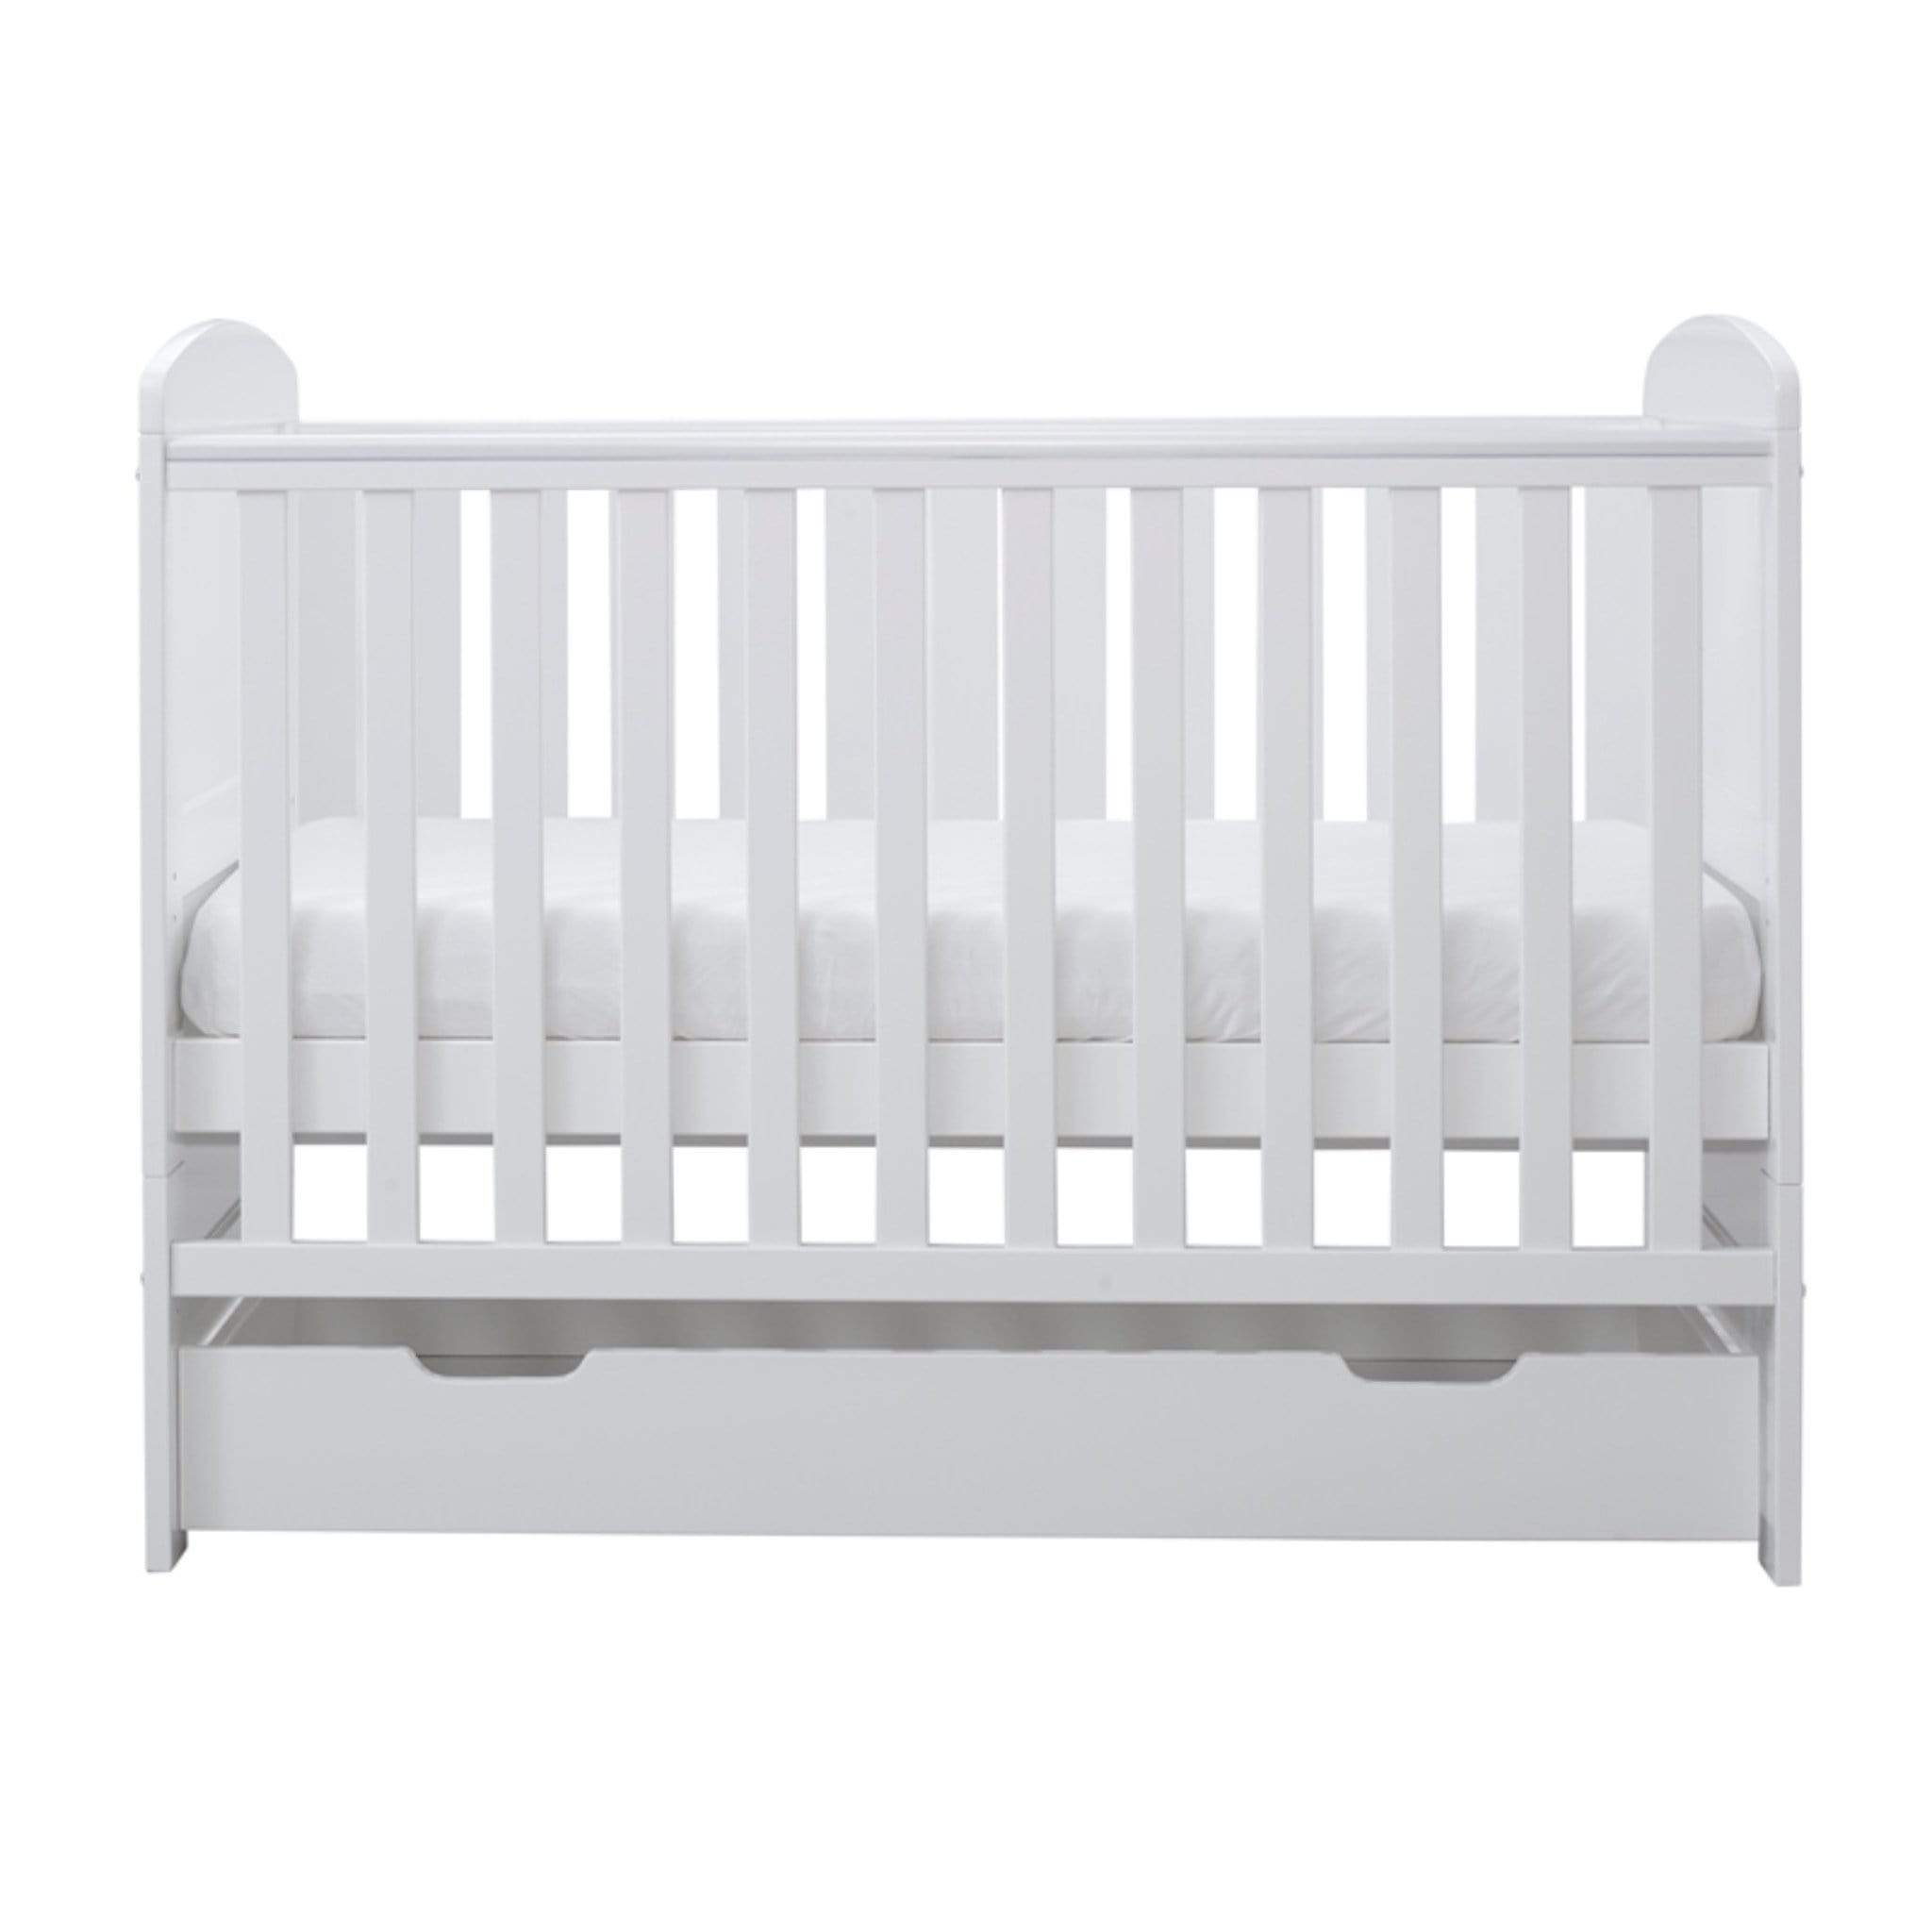 Ickle Bubba Coleby Mini 2 Piece Furniture Seat White Cot Beds